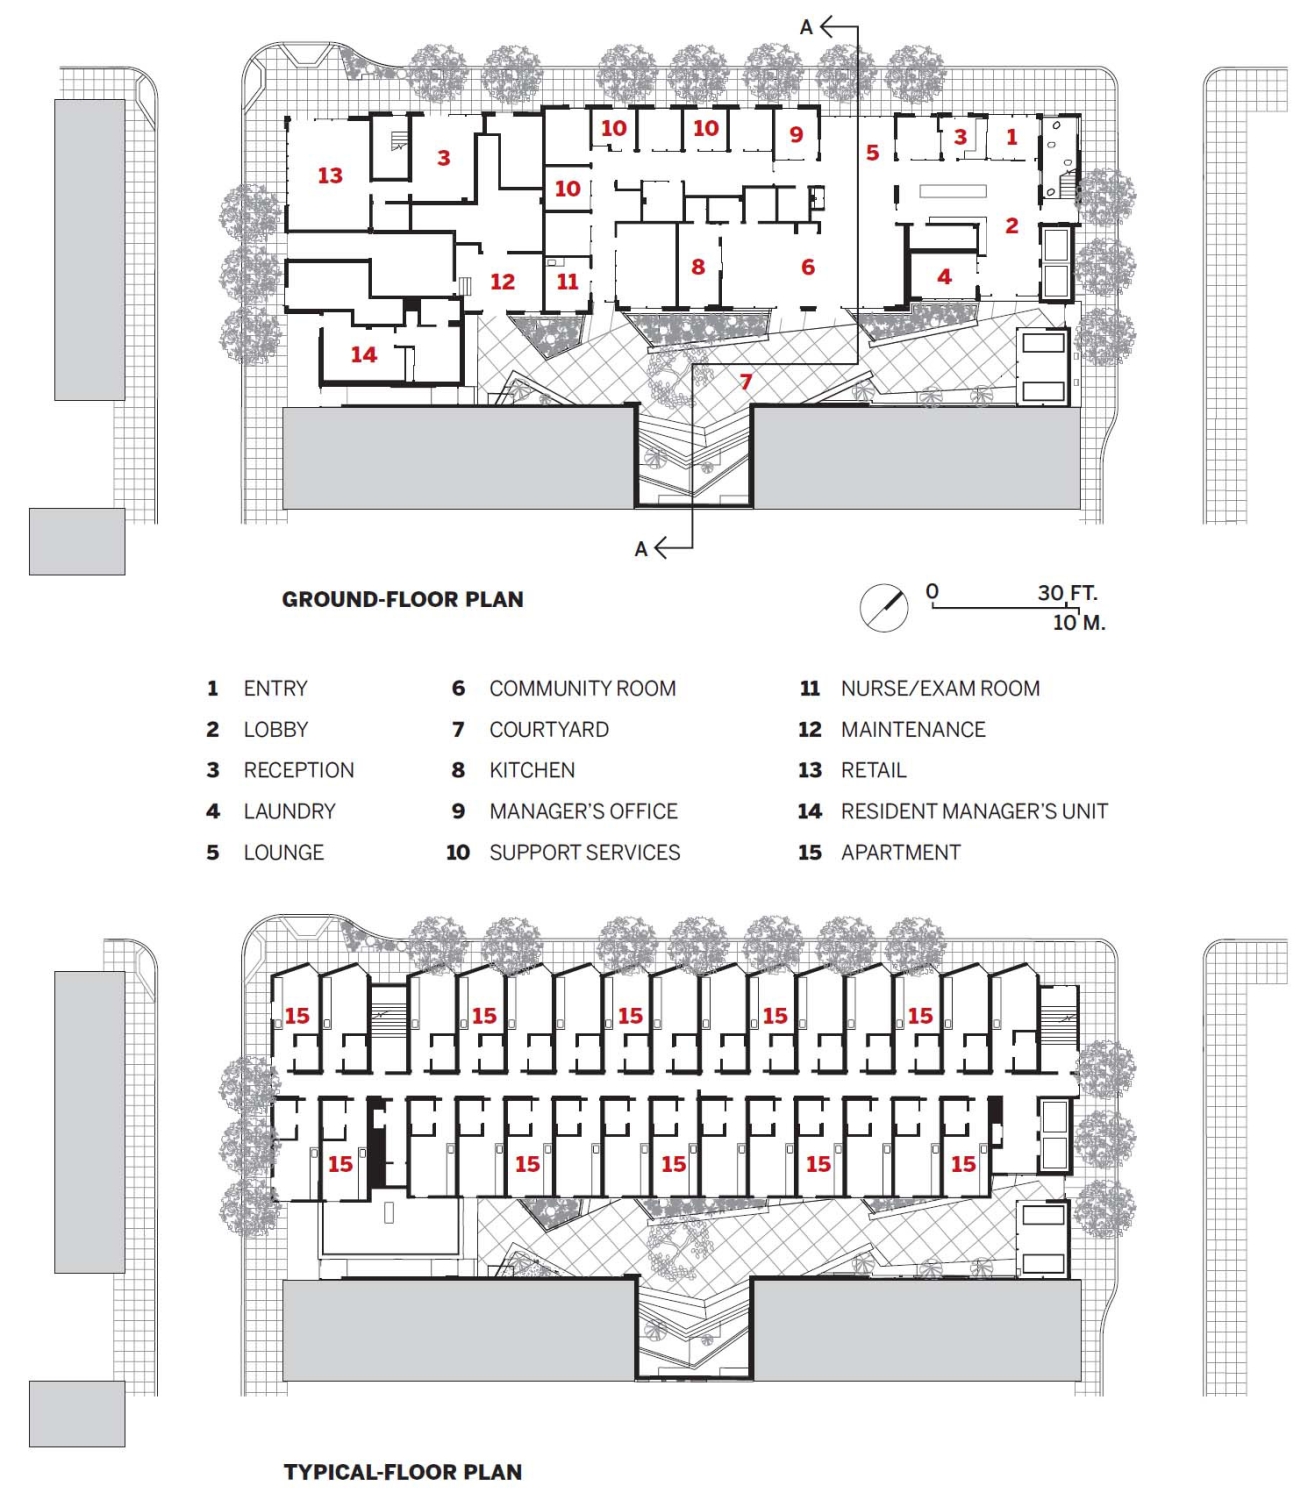 Site plan and upper-level plan with key indicated use of spaces.